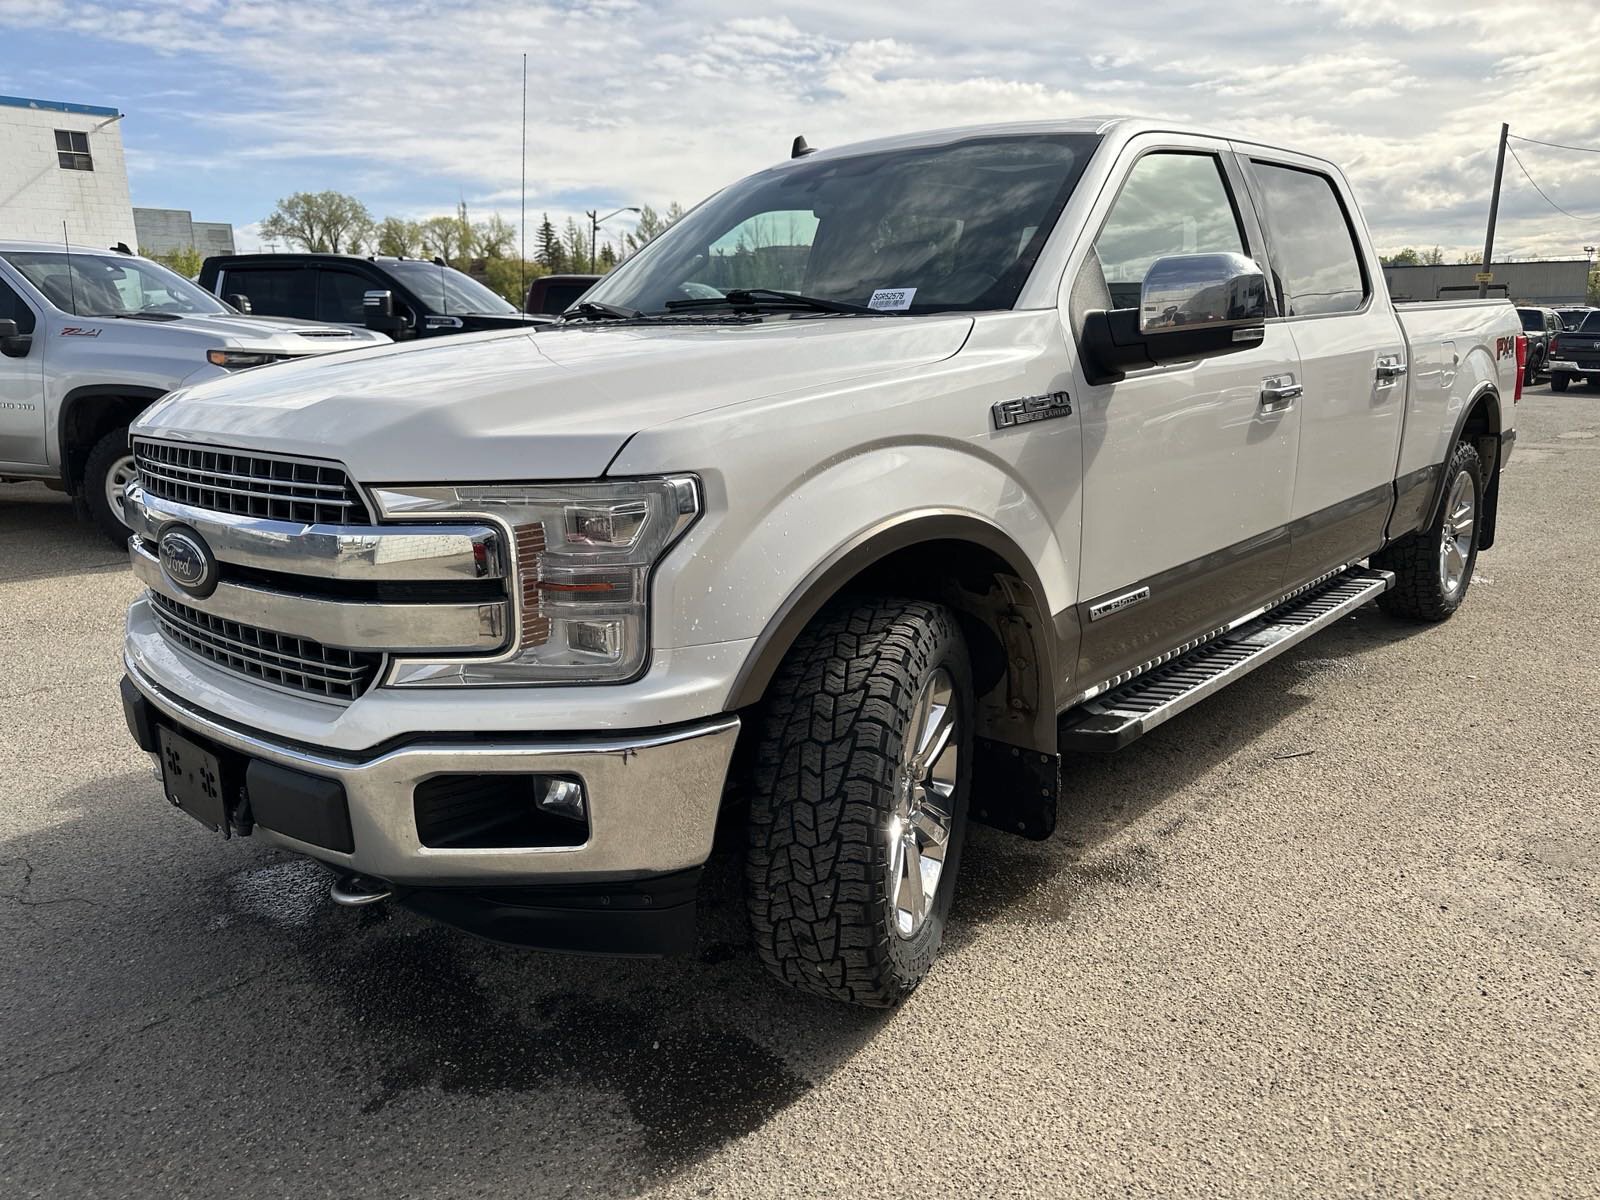 2019 Ford F-150 LARIAT | 3.0L POWER STROKE DIESEL | PANO SUNROOF |